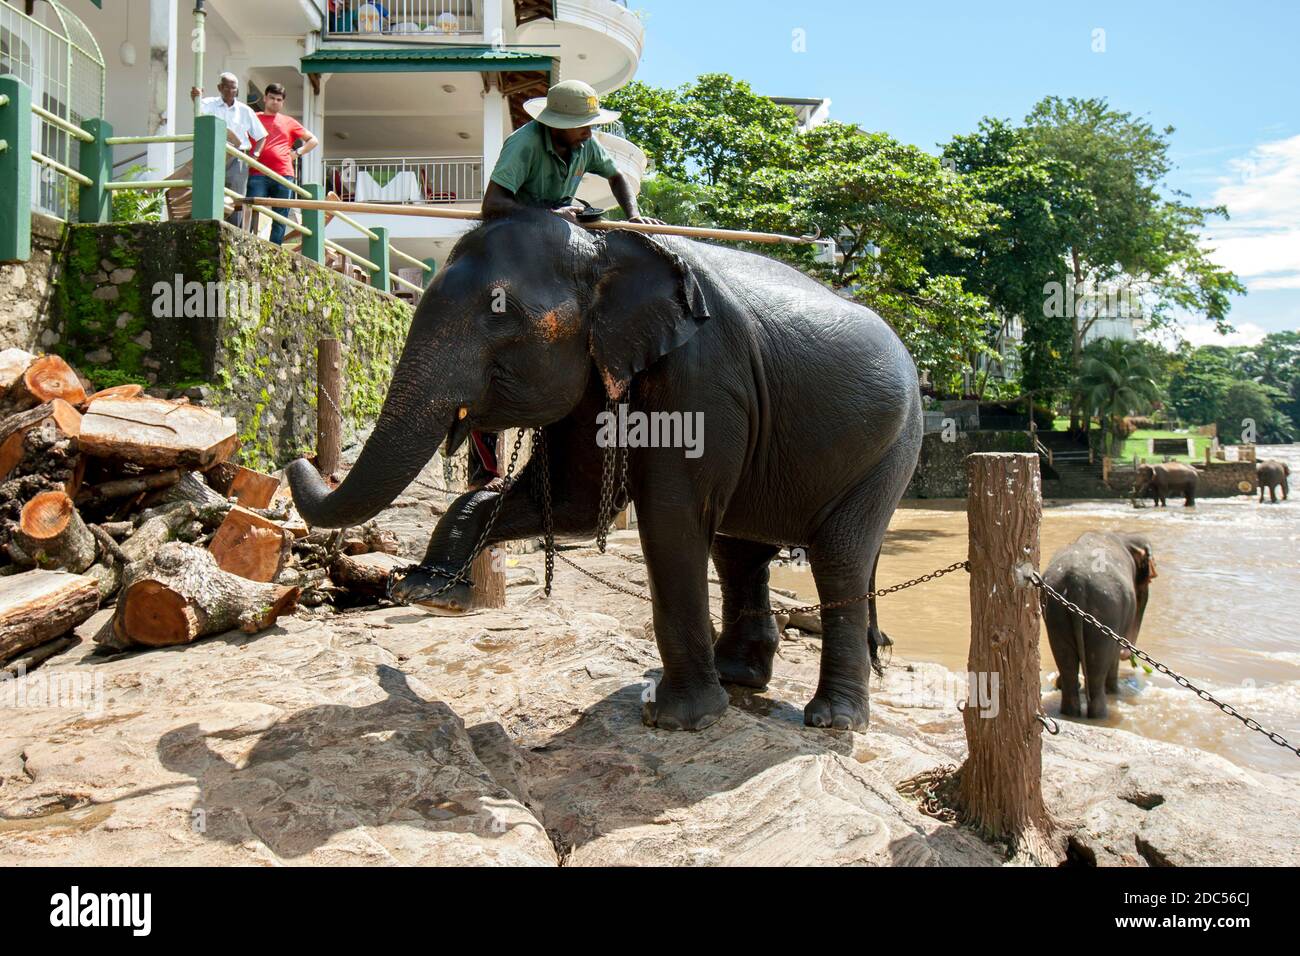 An elephant and mahout from the Pinnawala Elephant Orphanage in central Sri Lanka begin their walk from the Maha Oya River back to the orphanage. Stock Photo